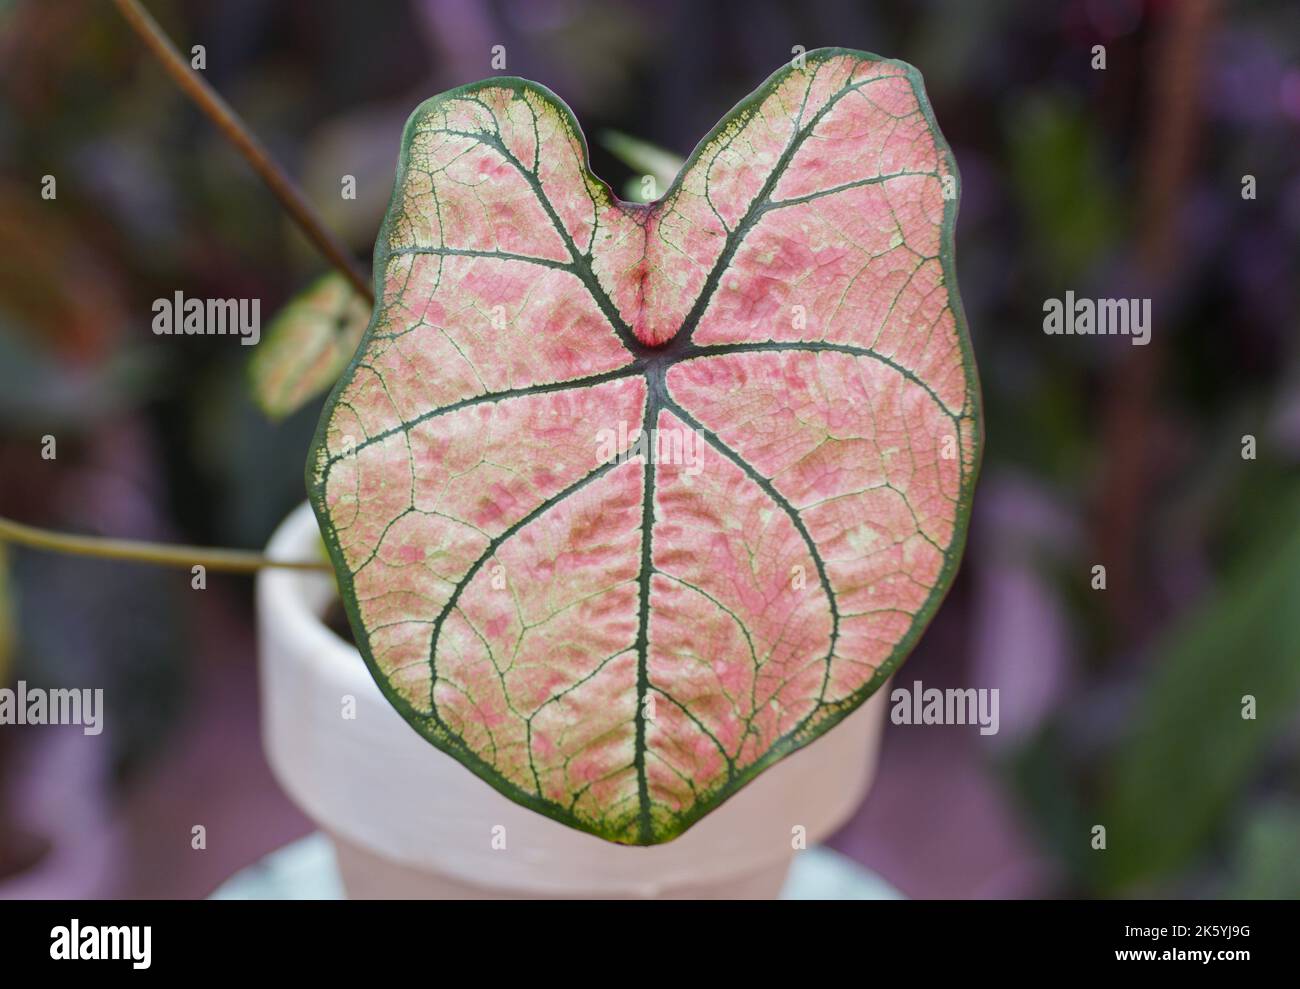 Close up of a light pink, white and green veined Caladium leaf Stock Photo